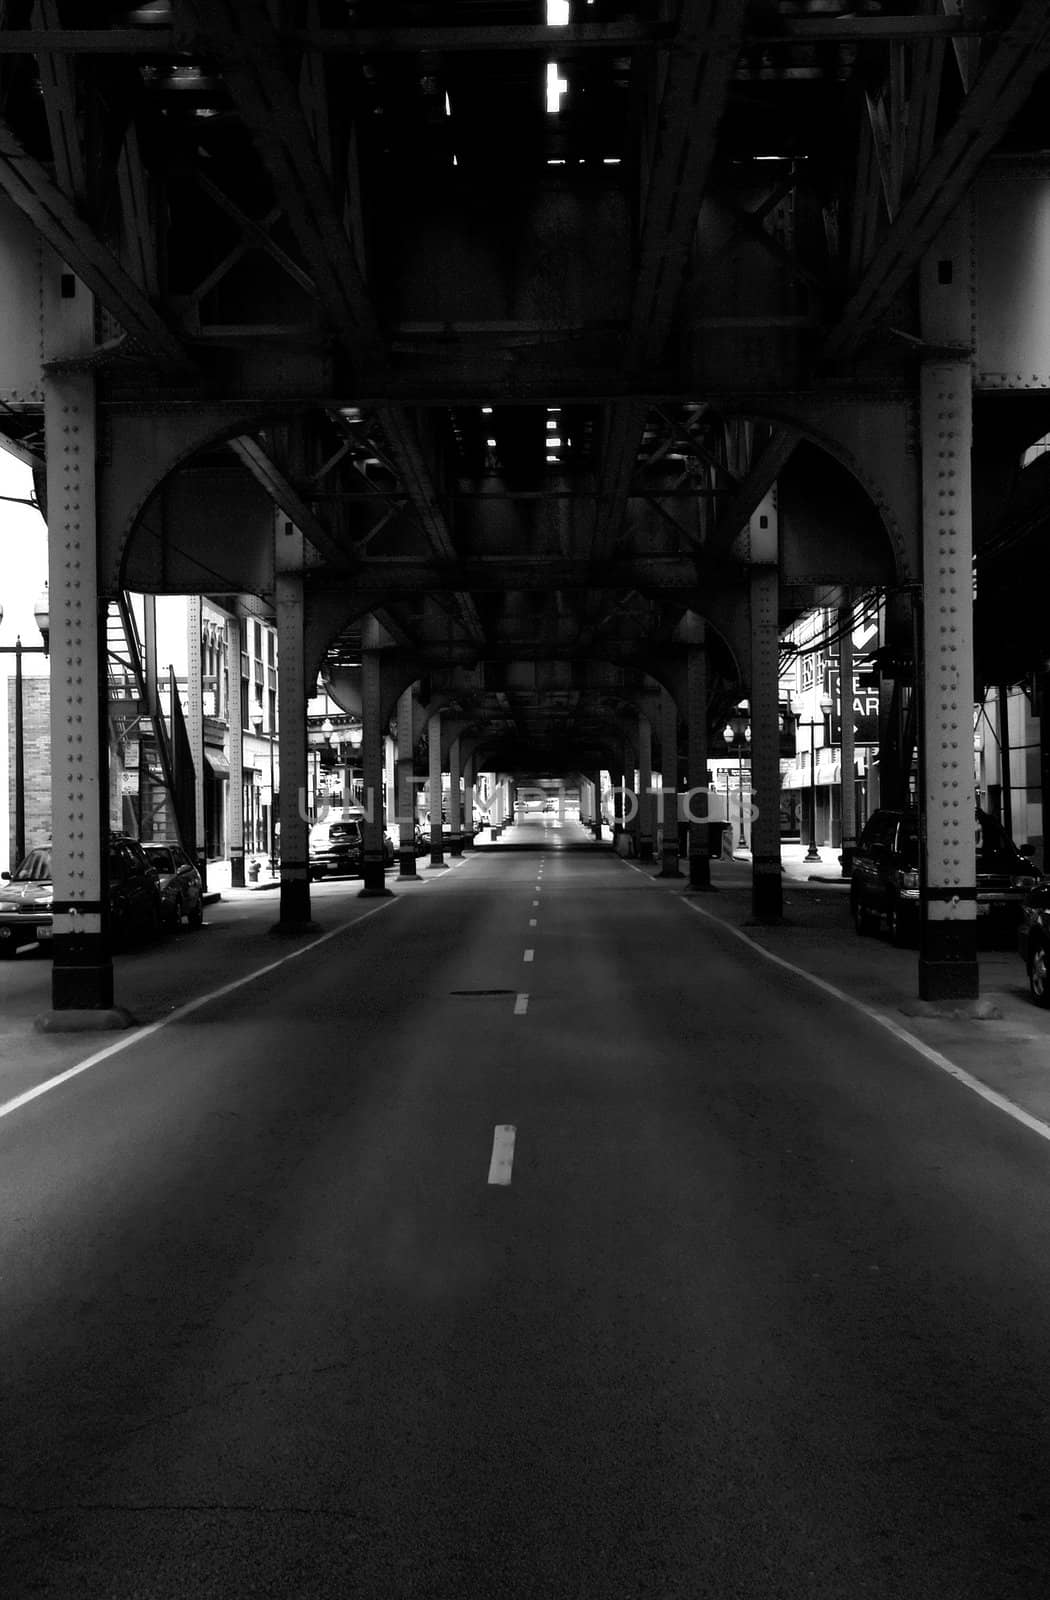 The Chicago street with the CTA train station above.